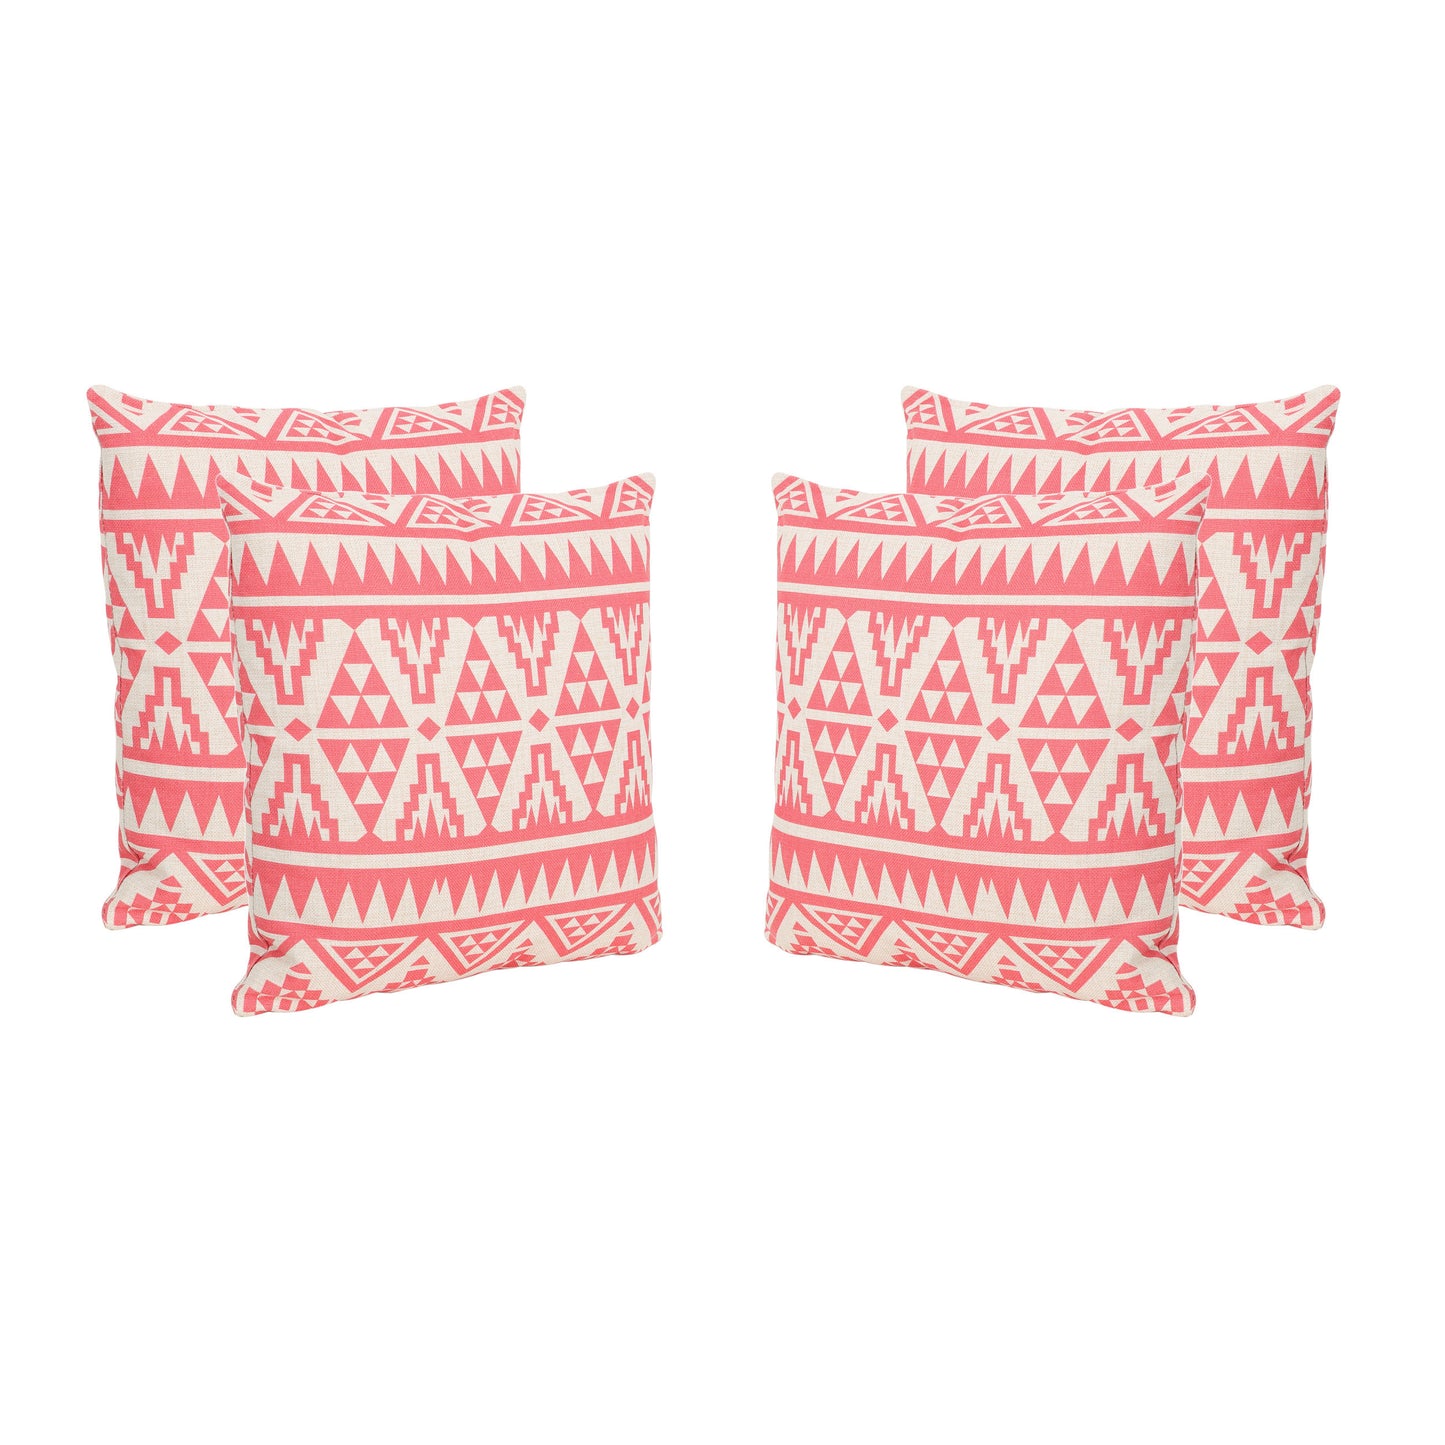 Fred Outdoor 18-inch Water Resistant Square Pillows (Set of 2)